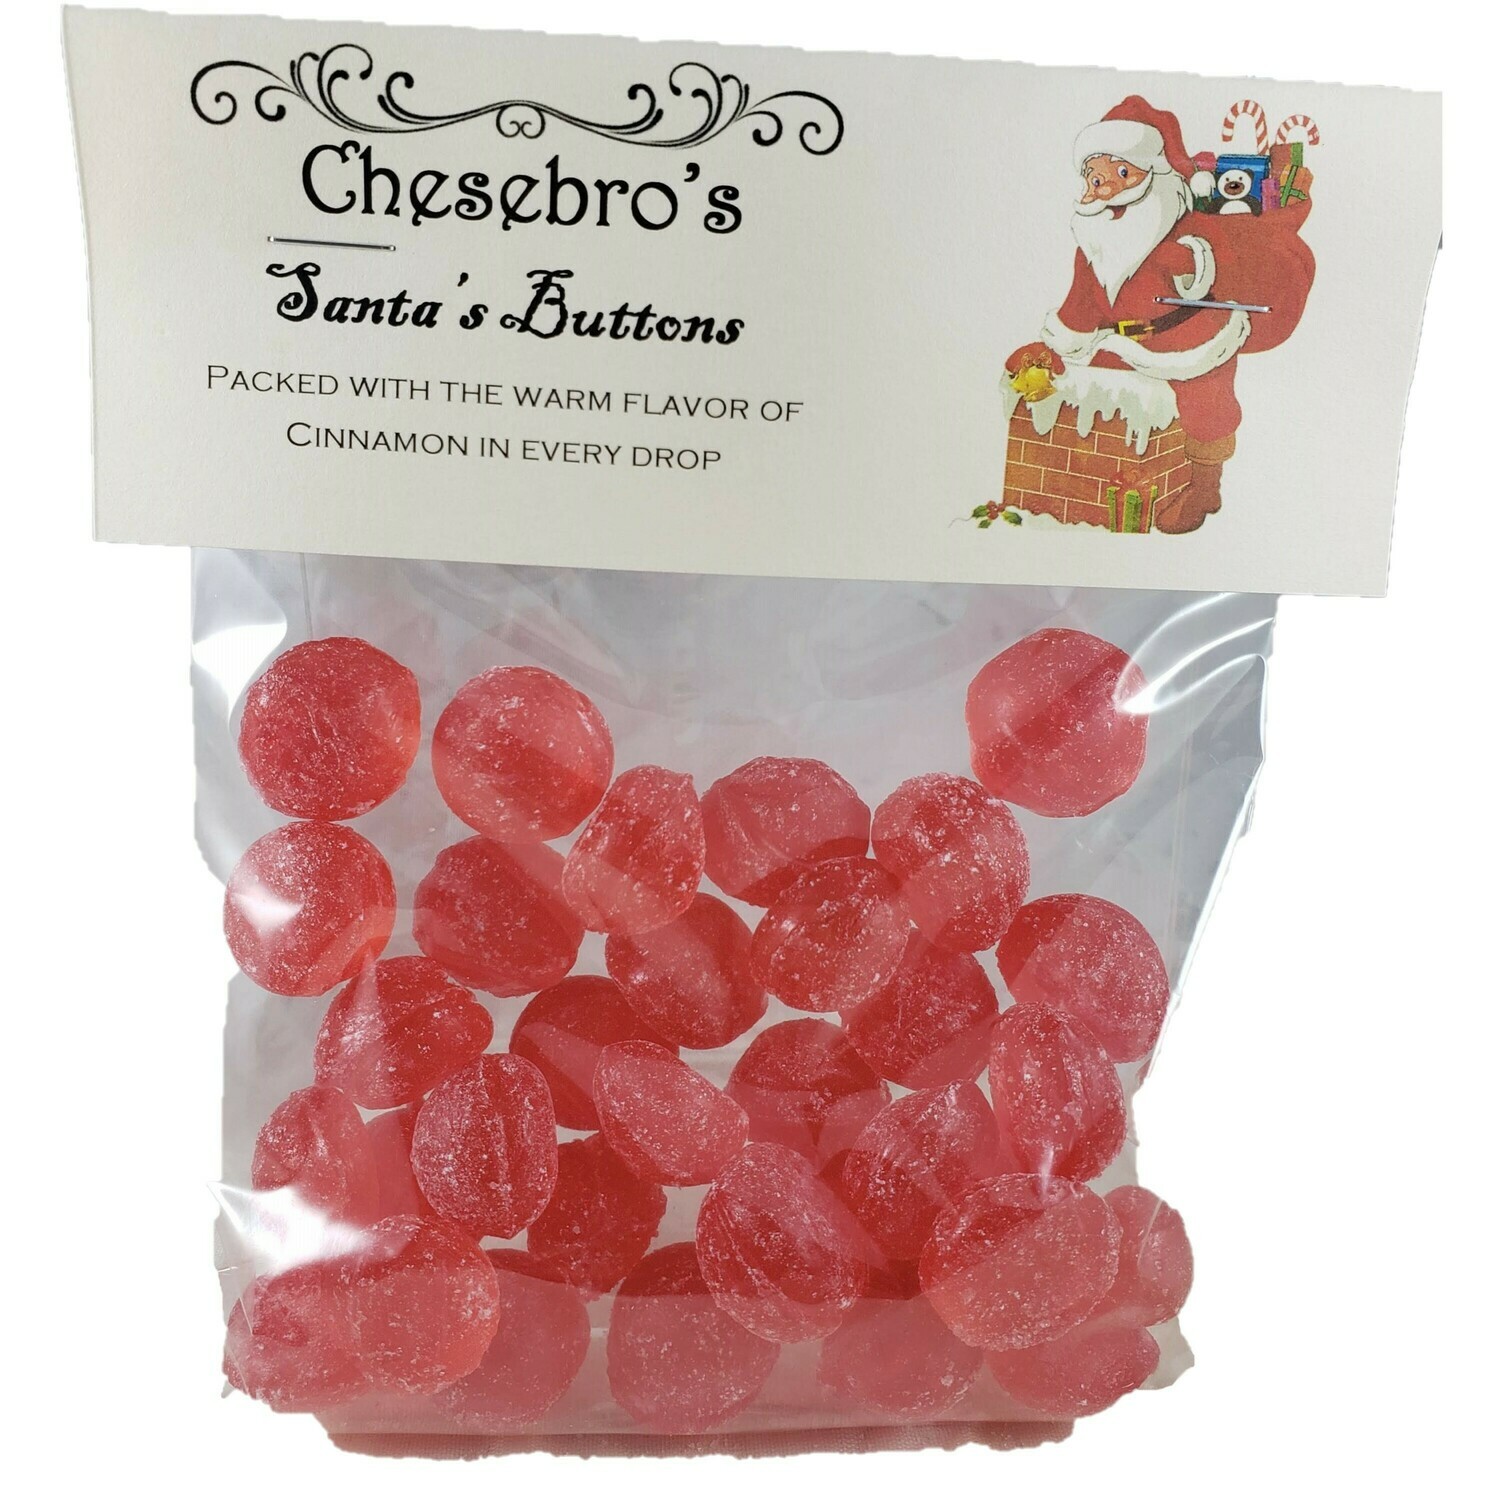 Santa's Buttons Hard Candy Drops